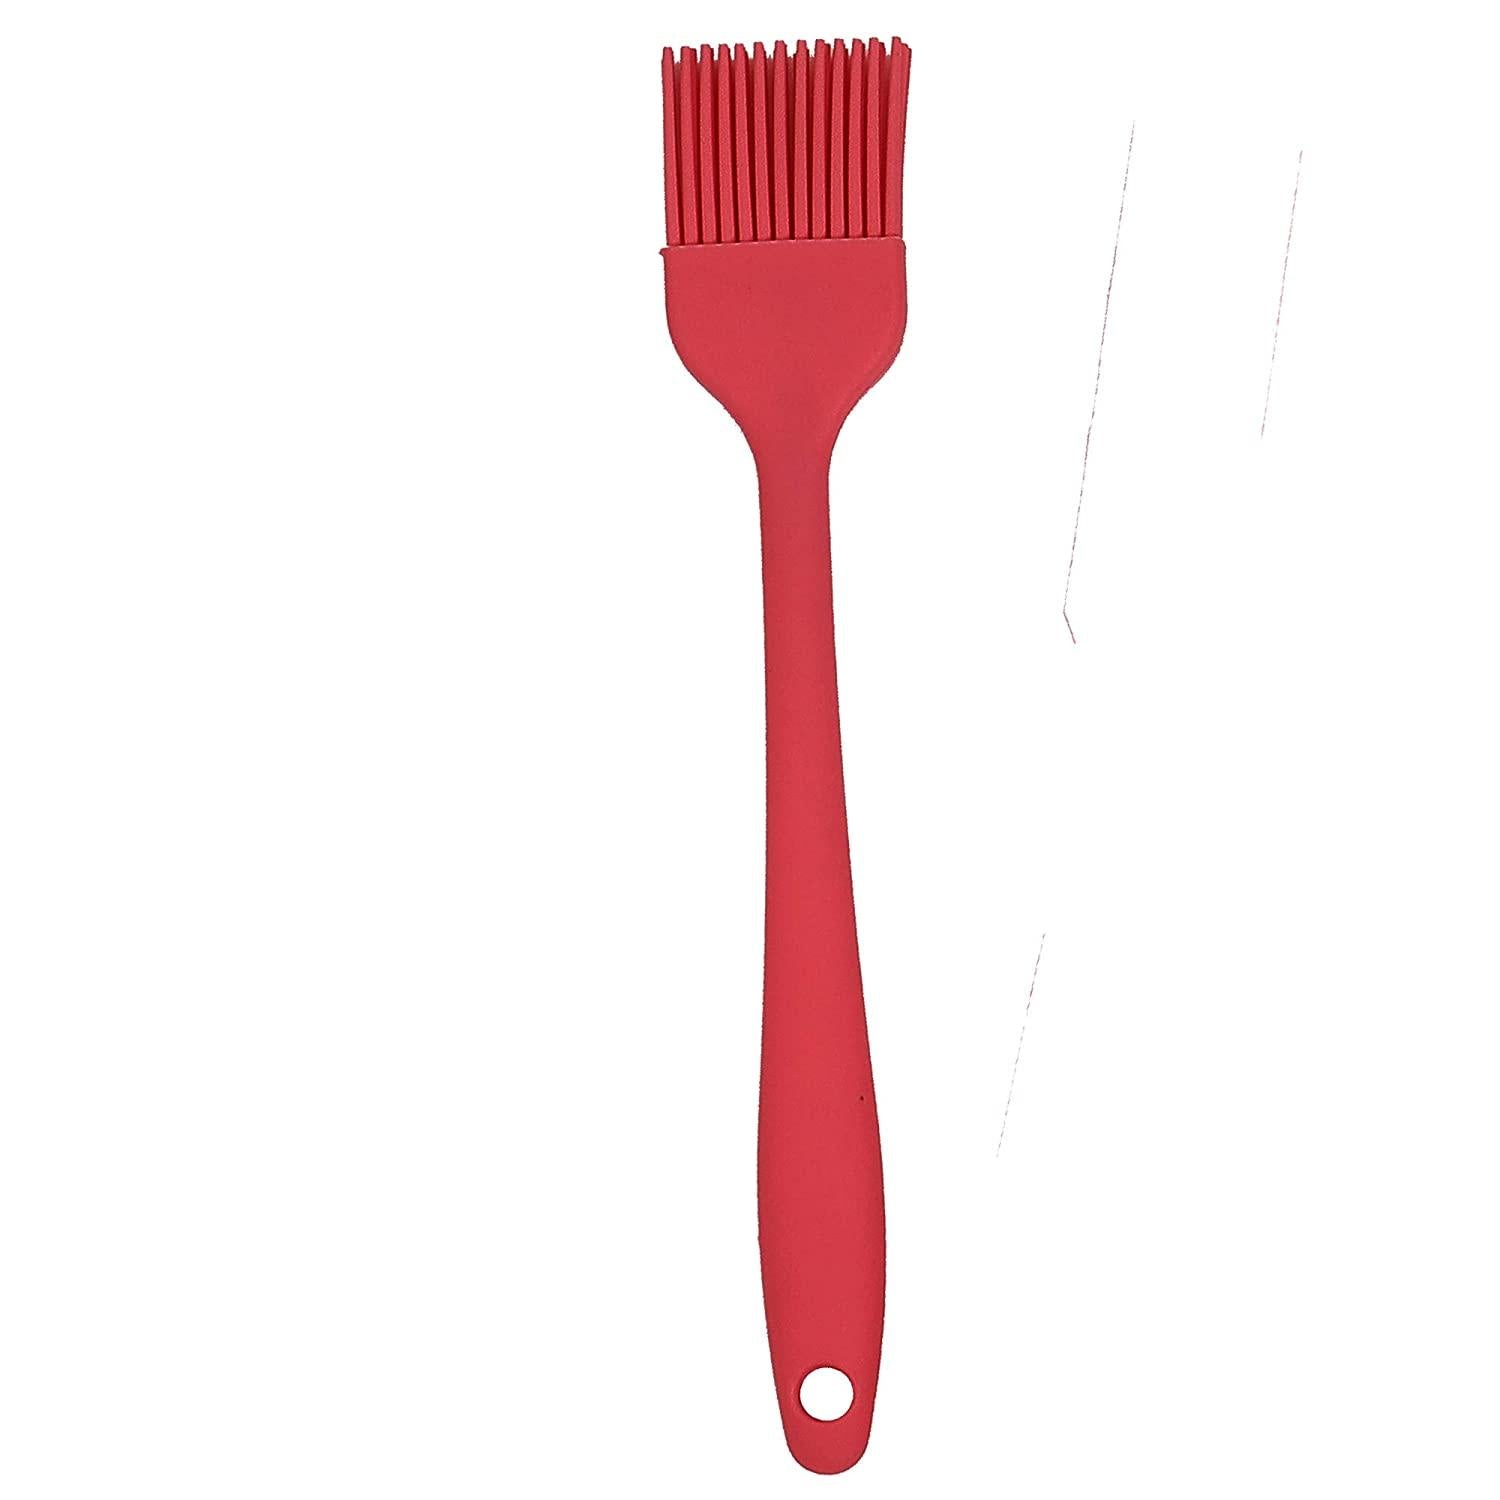 Oil Brush For Cooking - TruVeli